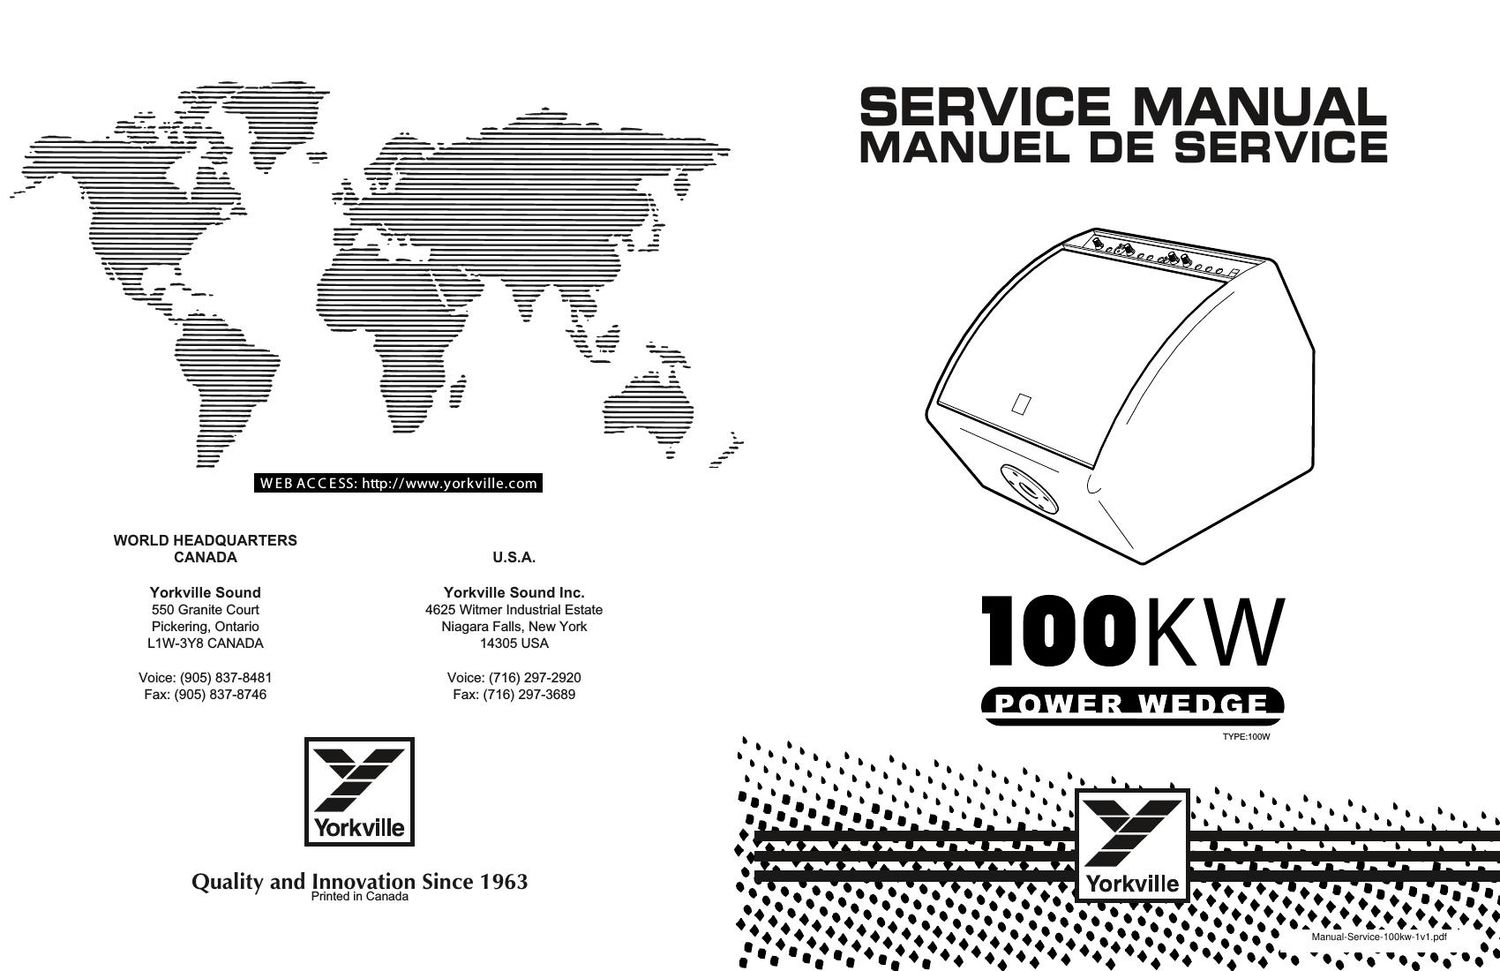 Yorkville 100KW Power Wedge Service Manual